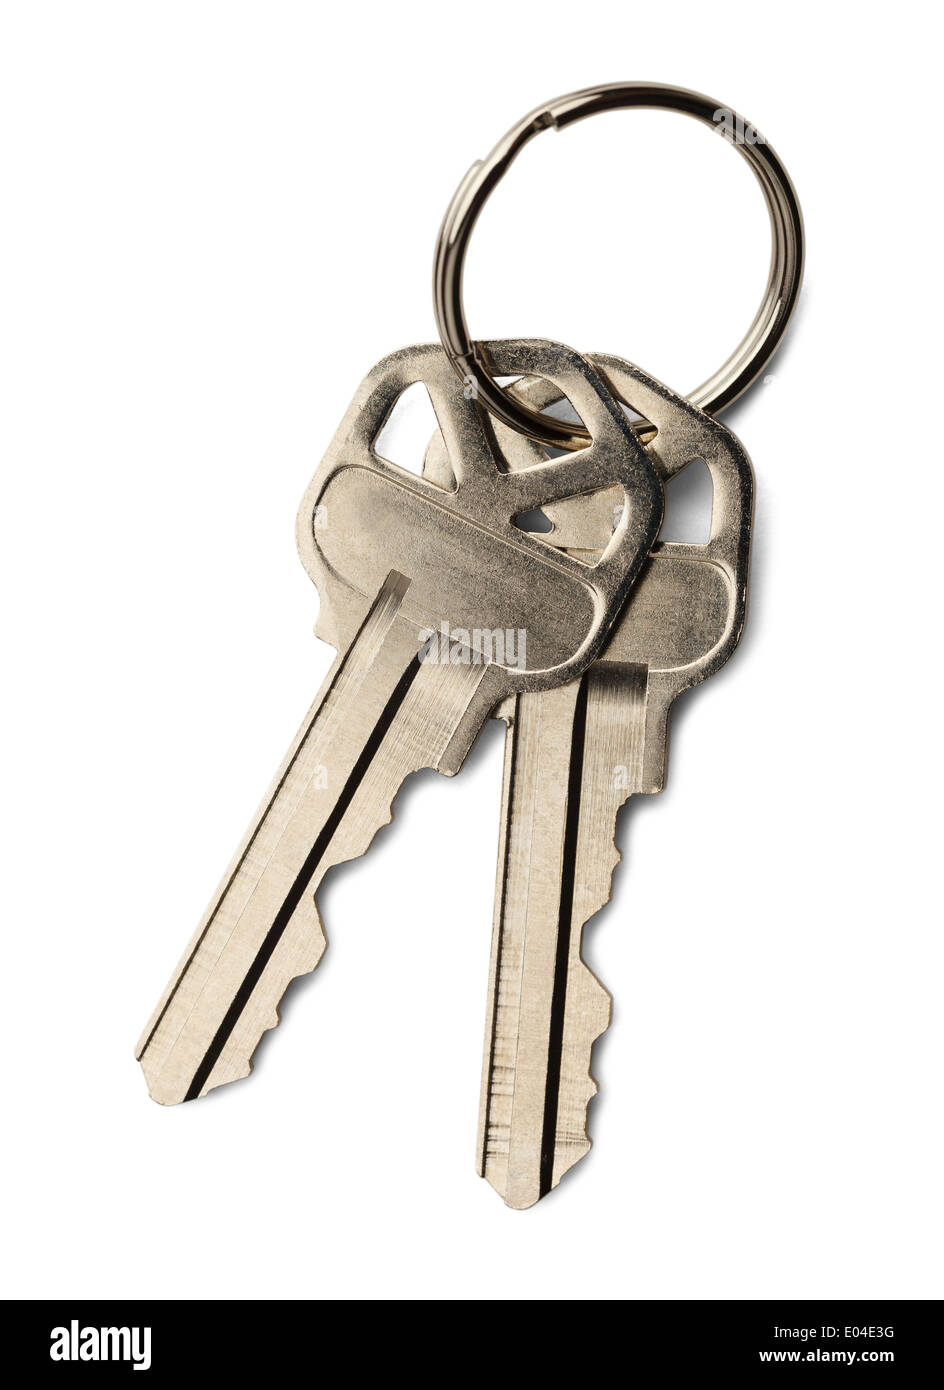 Two house keys on a key ring isolated on a white background. Stock Photo